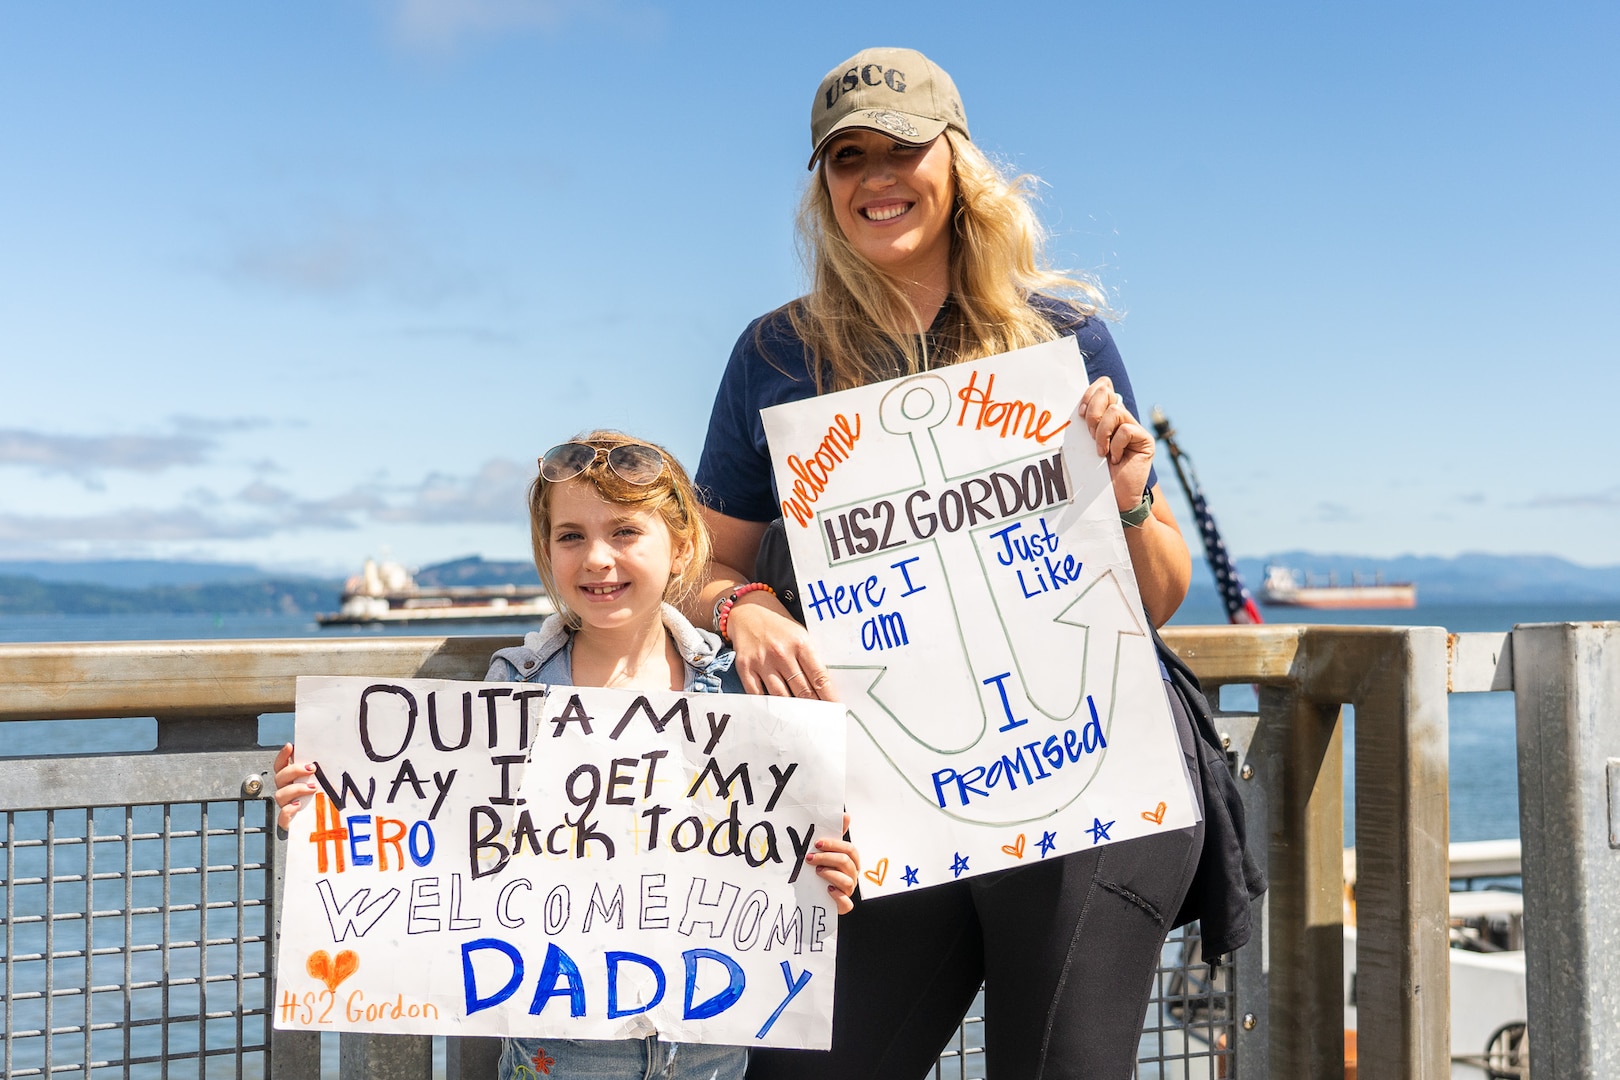 Families greet the crew of USCGC Steadfast as they return to the cutter’s homeport in Astoria, Oregon, following a patrol July 21, 2023. Steadfast is a 210-foot reliance class cutter. (U.S. Coast Guard photo by Petty Officer 1st Class Travis Magee)